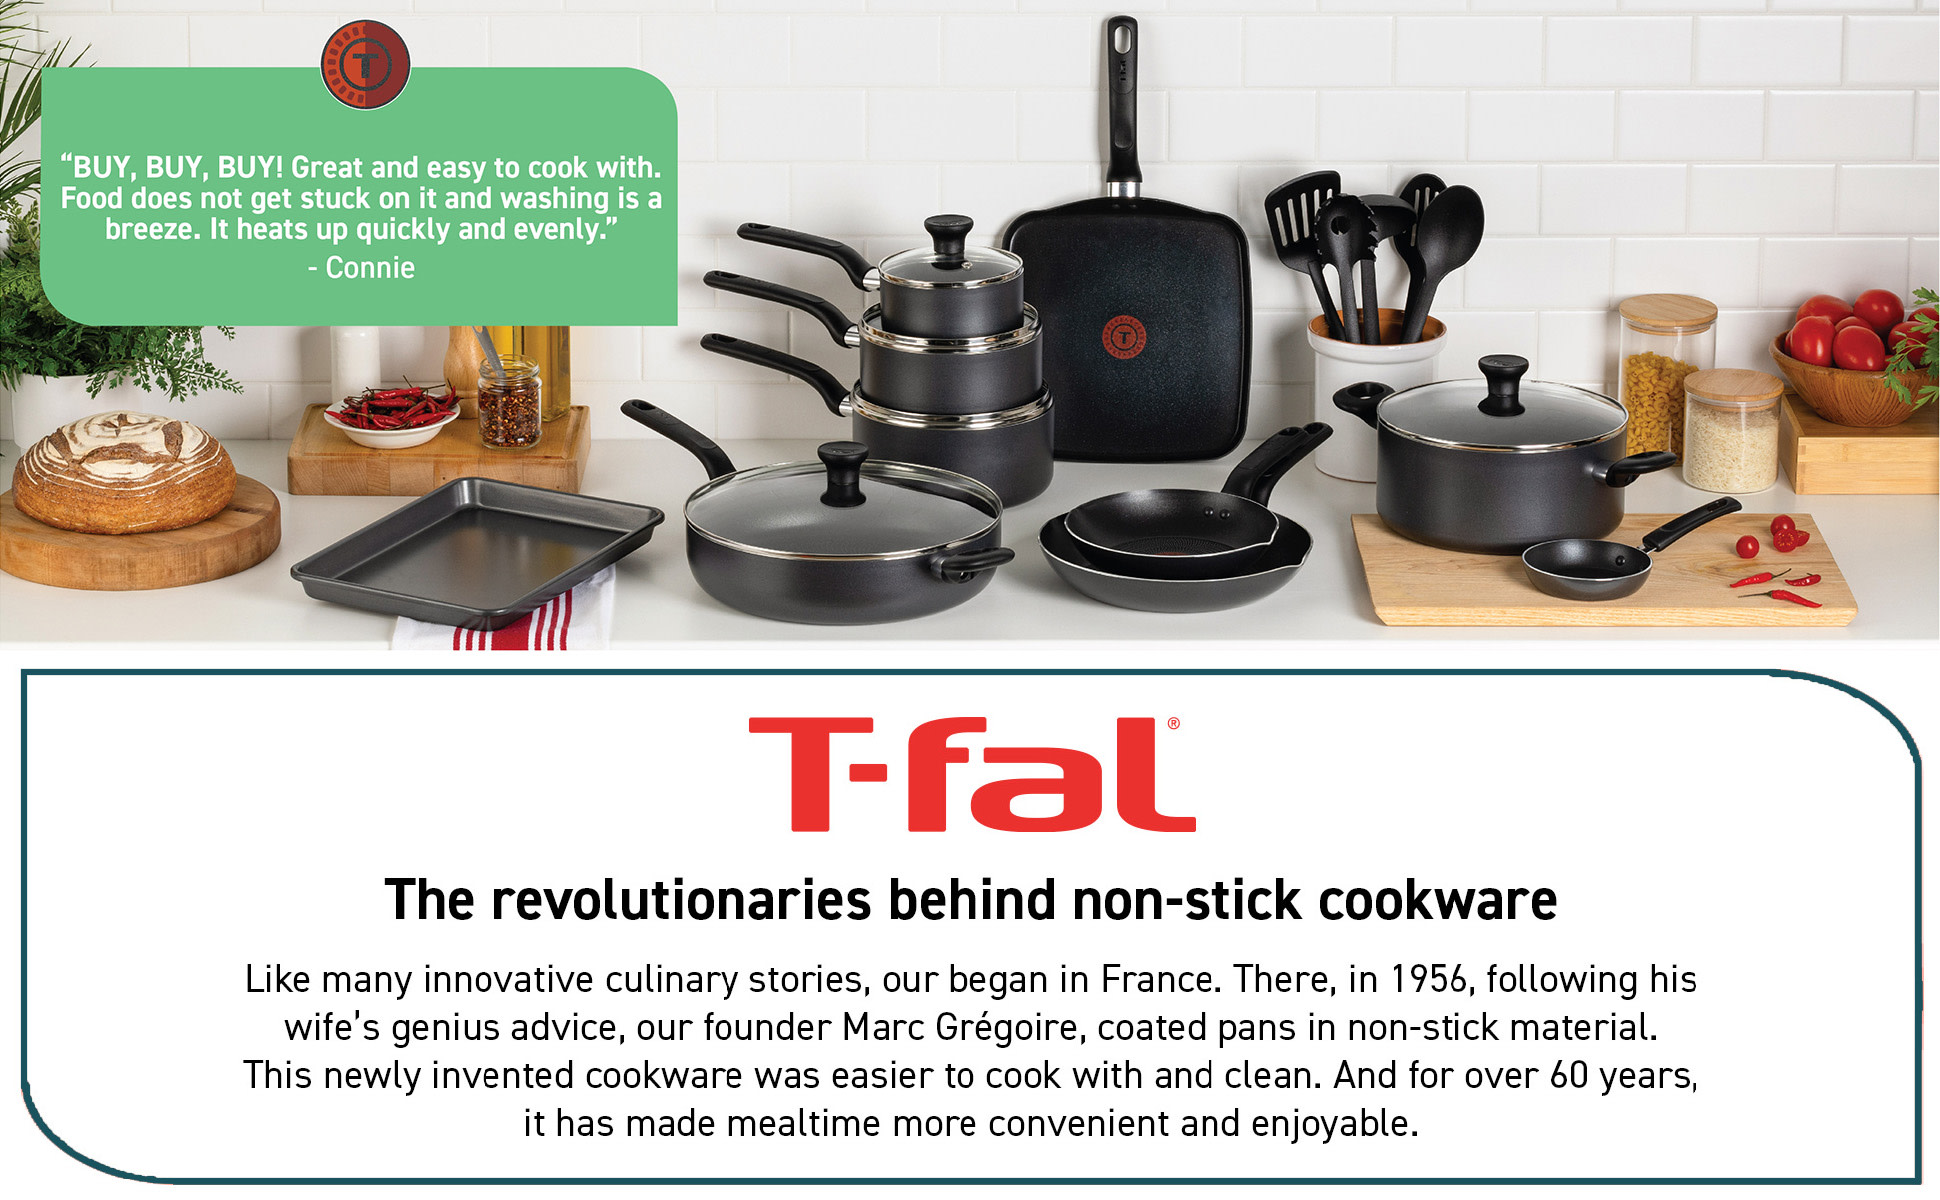 T-fal Easy Care Nonstick Cookware, 20 Piece Set, Grey, Dishwasher